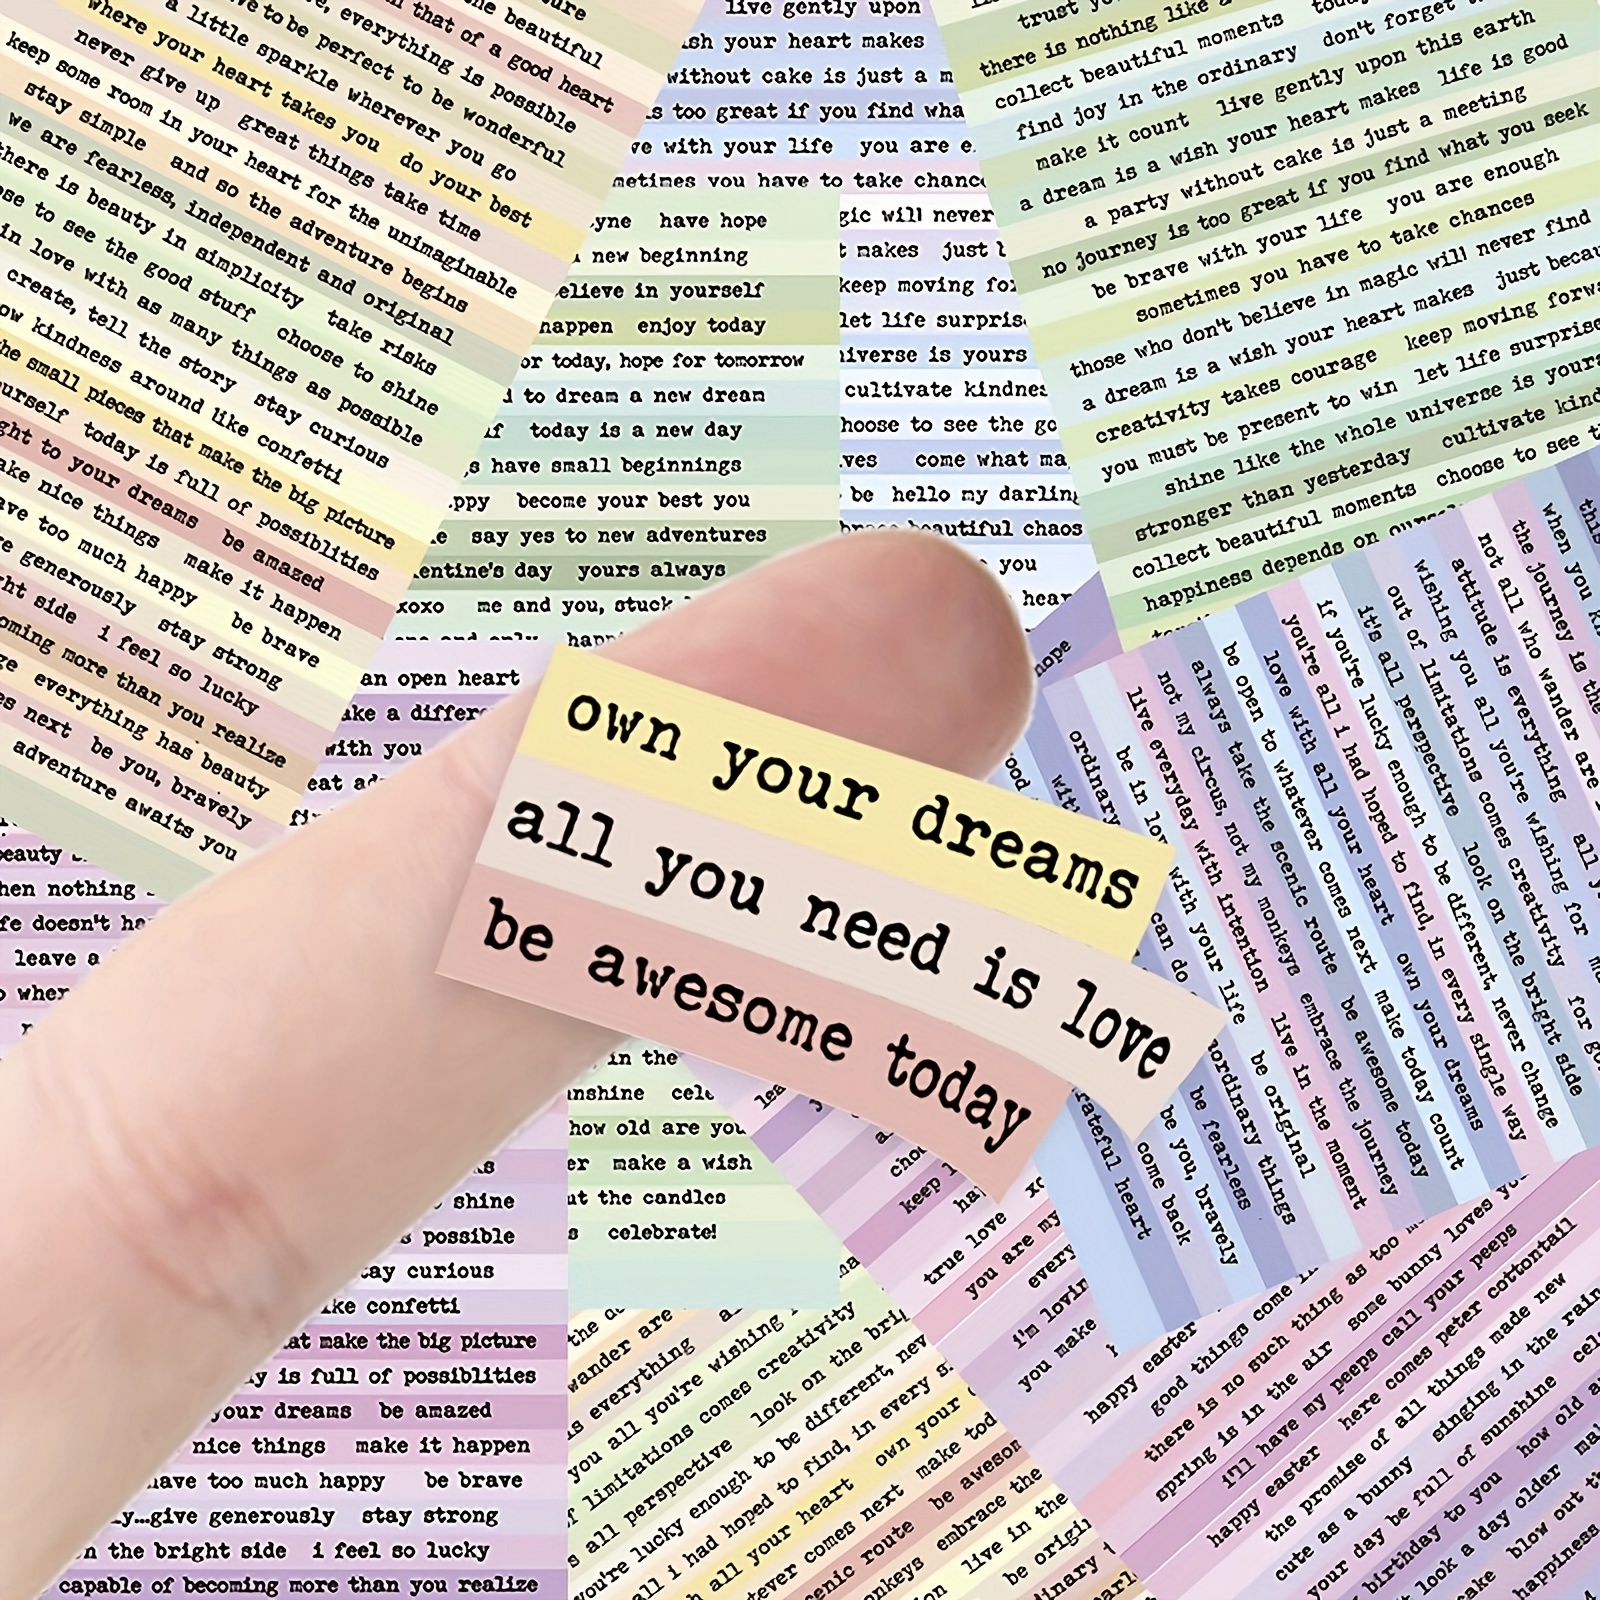 

406pcs Inspirational Quote Stickers Set - Fun Macaron Colors, Scrapbooking Supplies, Journaling & Planner Decoration, Vintage Aesthetic Phrases For Diy Arts And Crafts, Notebook & Album Collage Kit